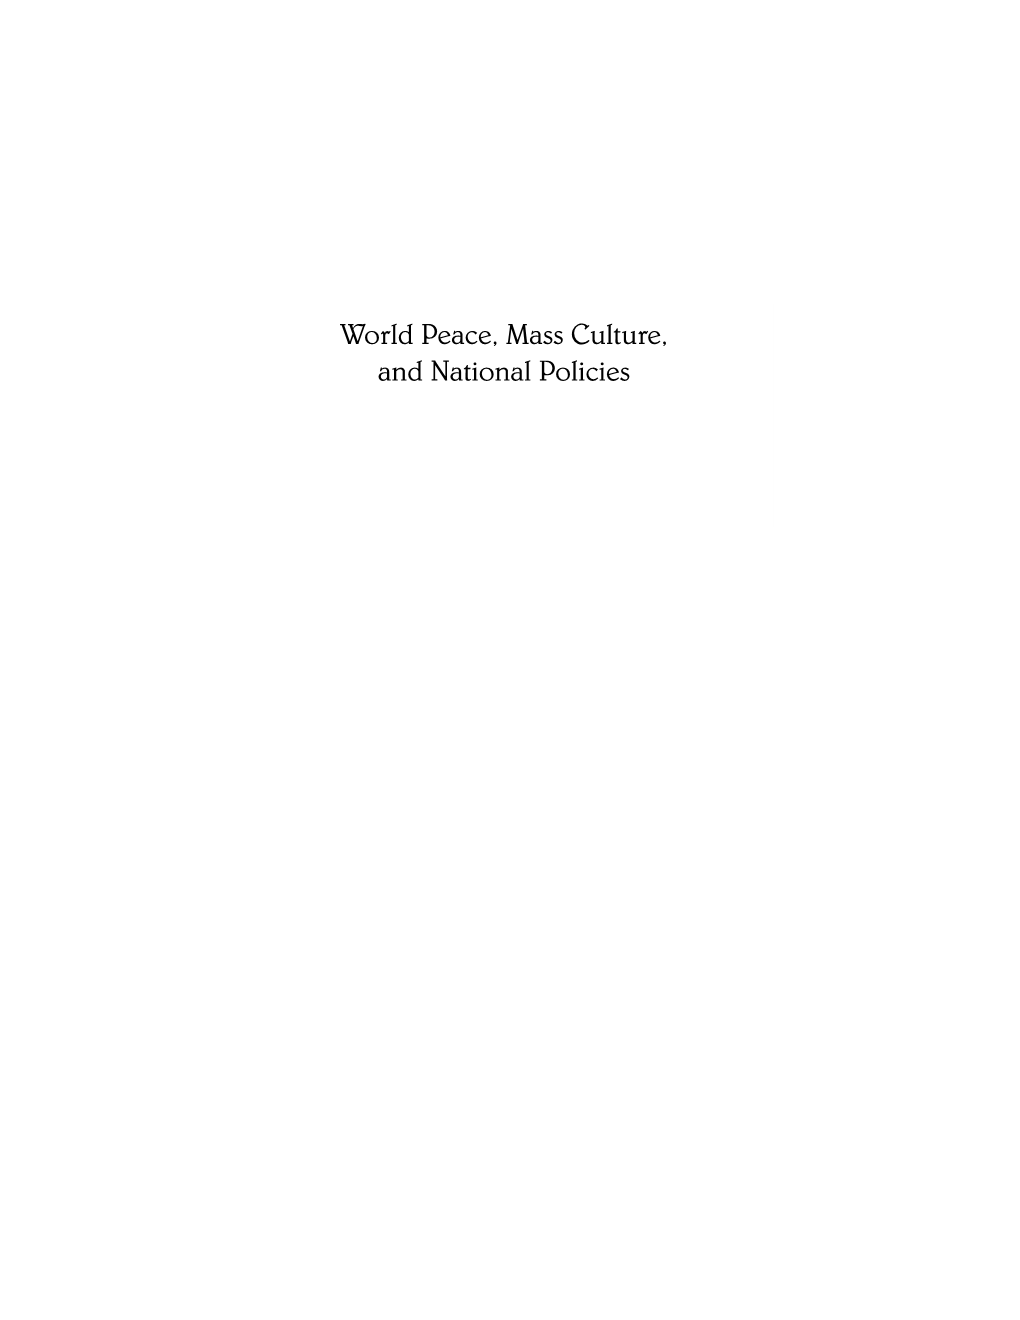 World Peace, Mass Culture, and National Policies Recent Titles in Civic Discourse for the Third Millennium Michael H